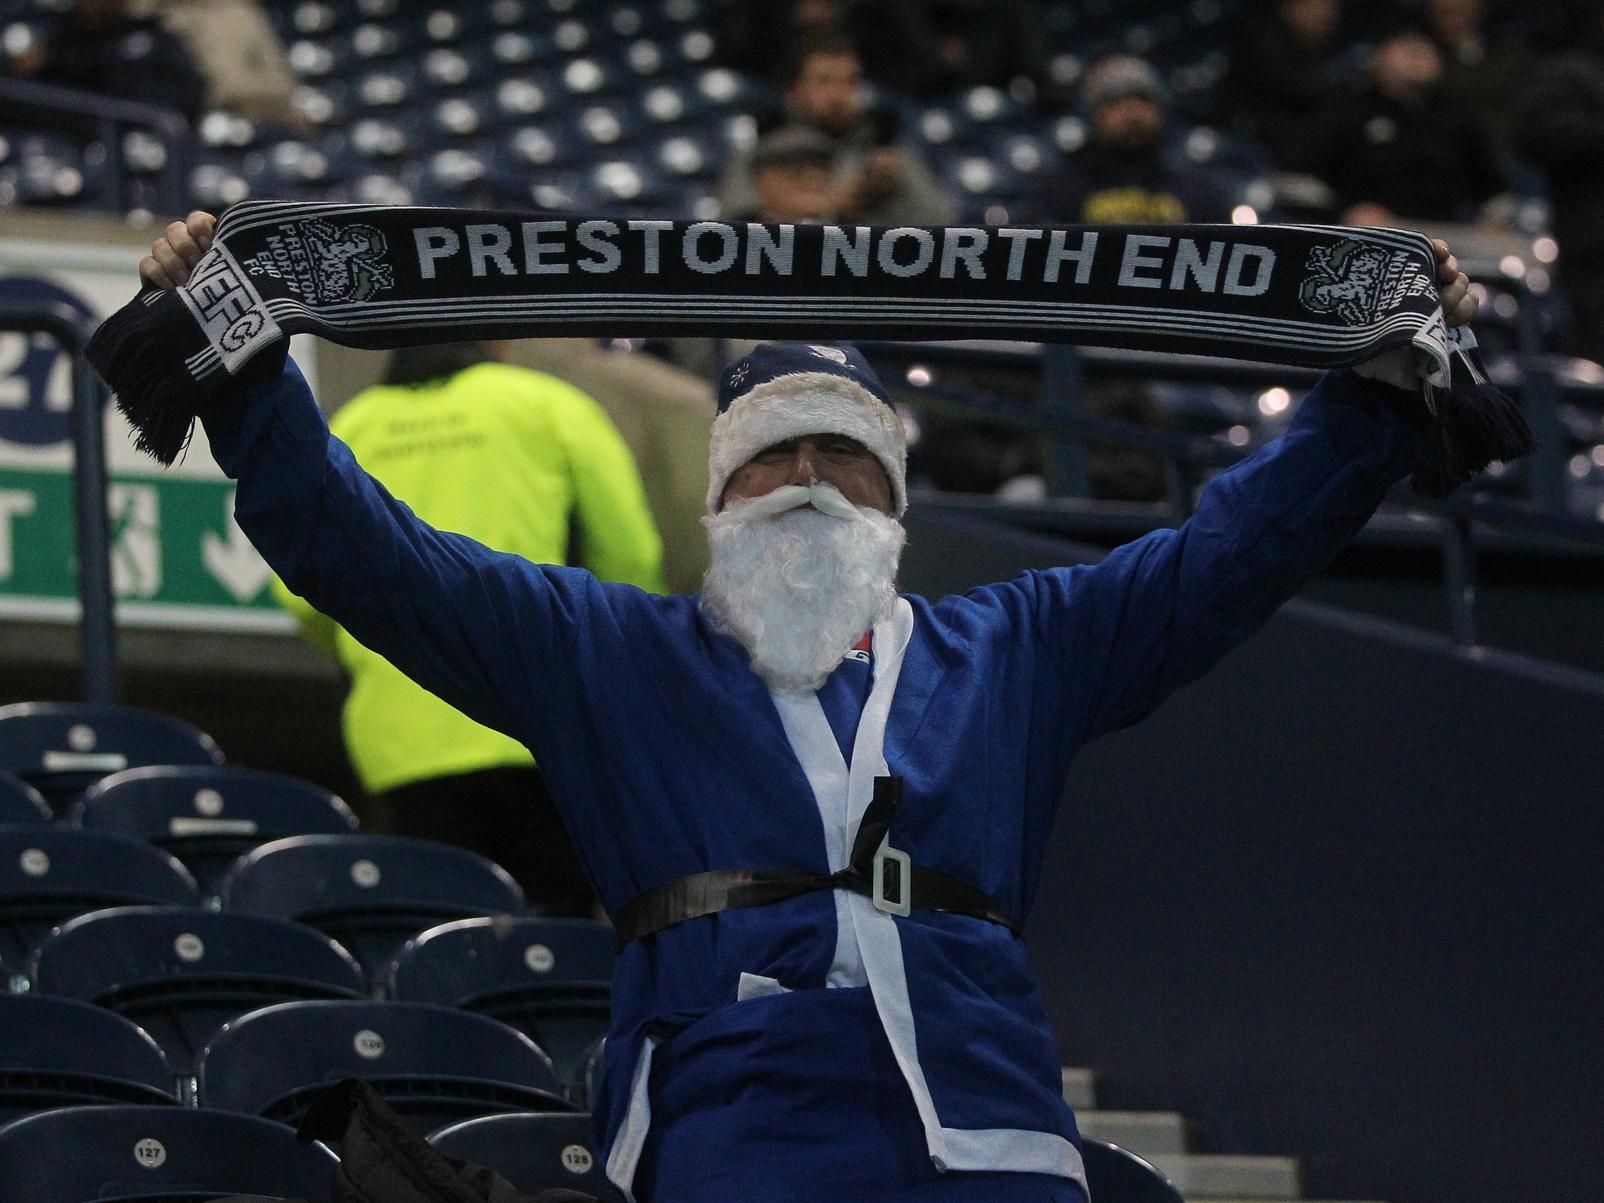 Santa Claus shows his true colours, and it turns out, he's a North Ender!